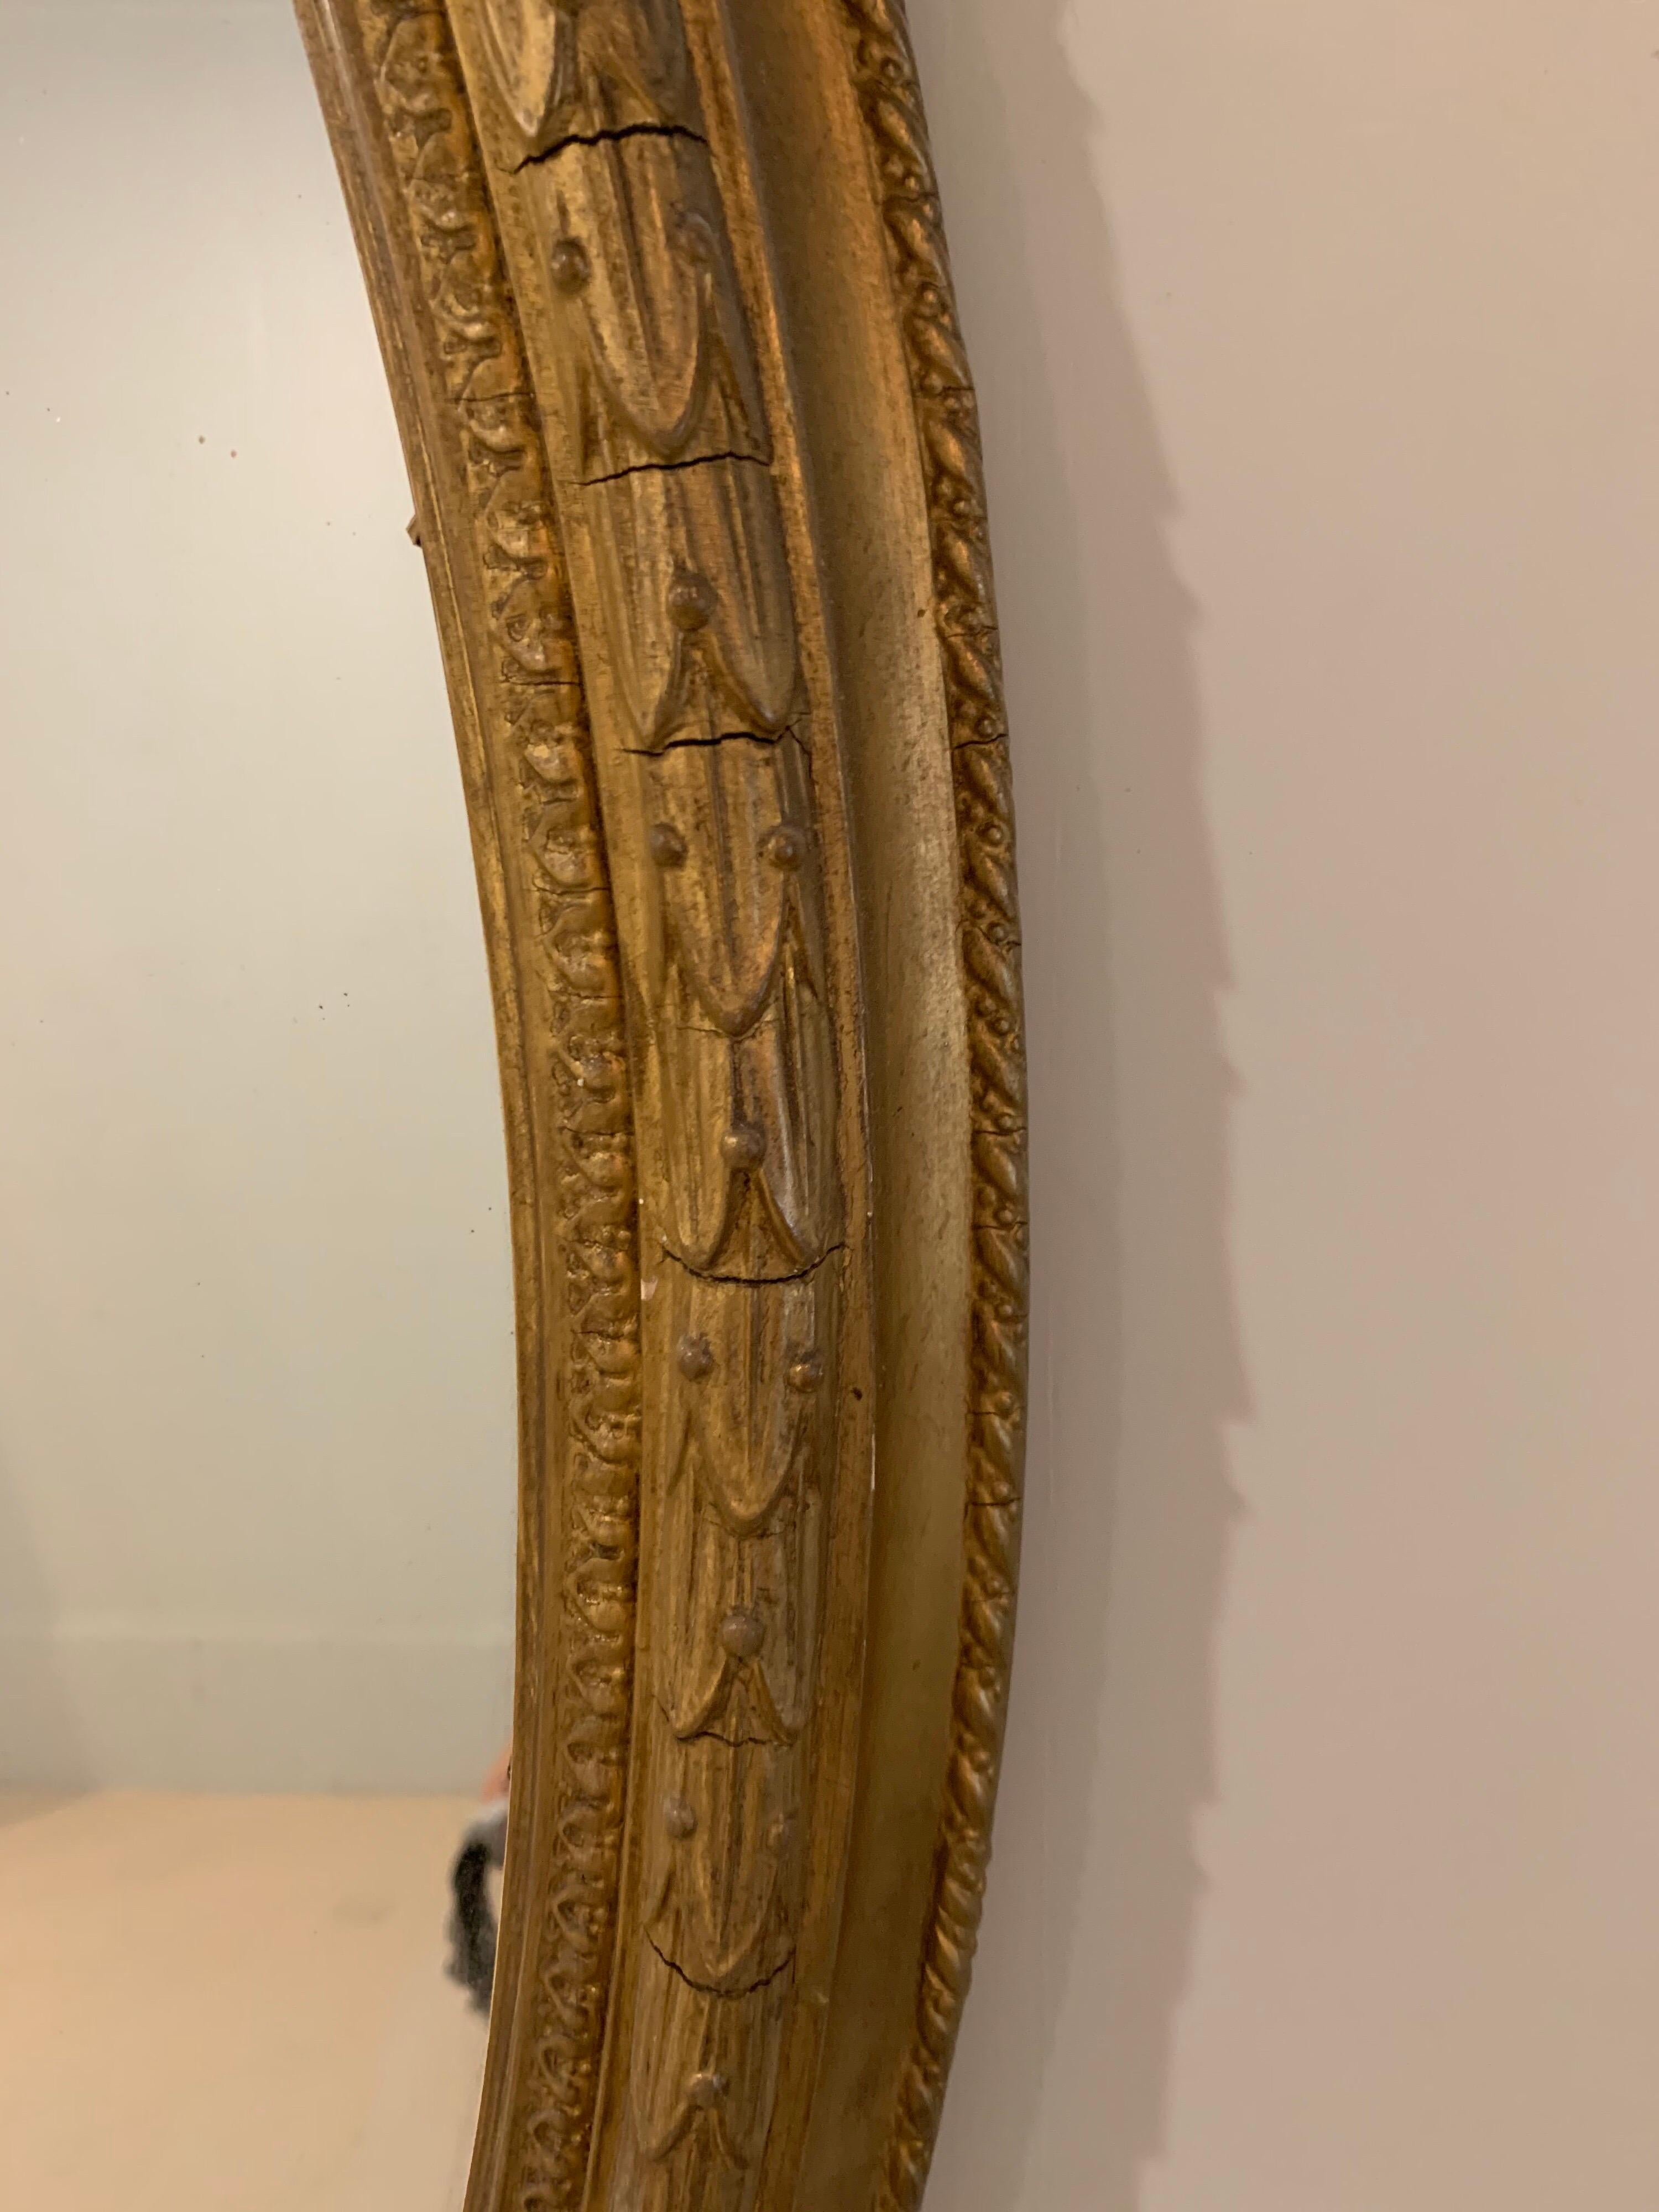 19th Century French Carved and Giltwood Oval Mirror with 3-Arm Sconce In Good Condition For Sale In Dallas, TX